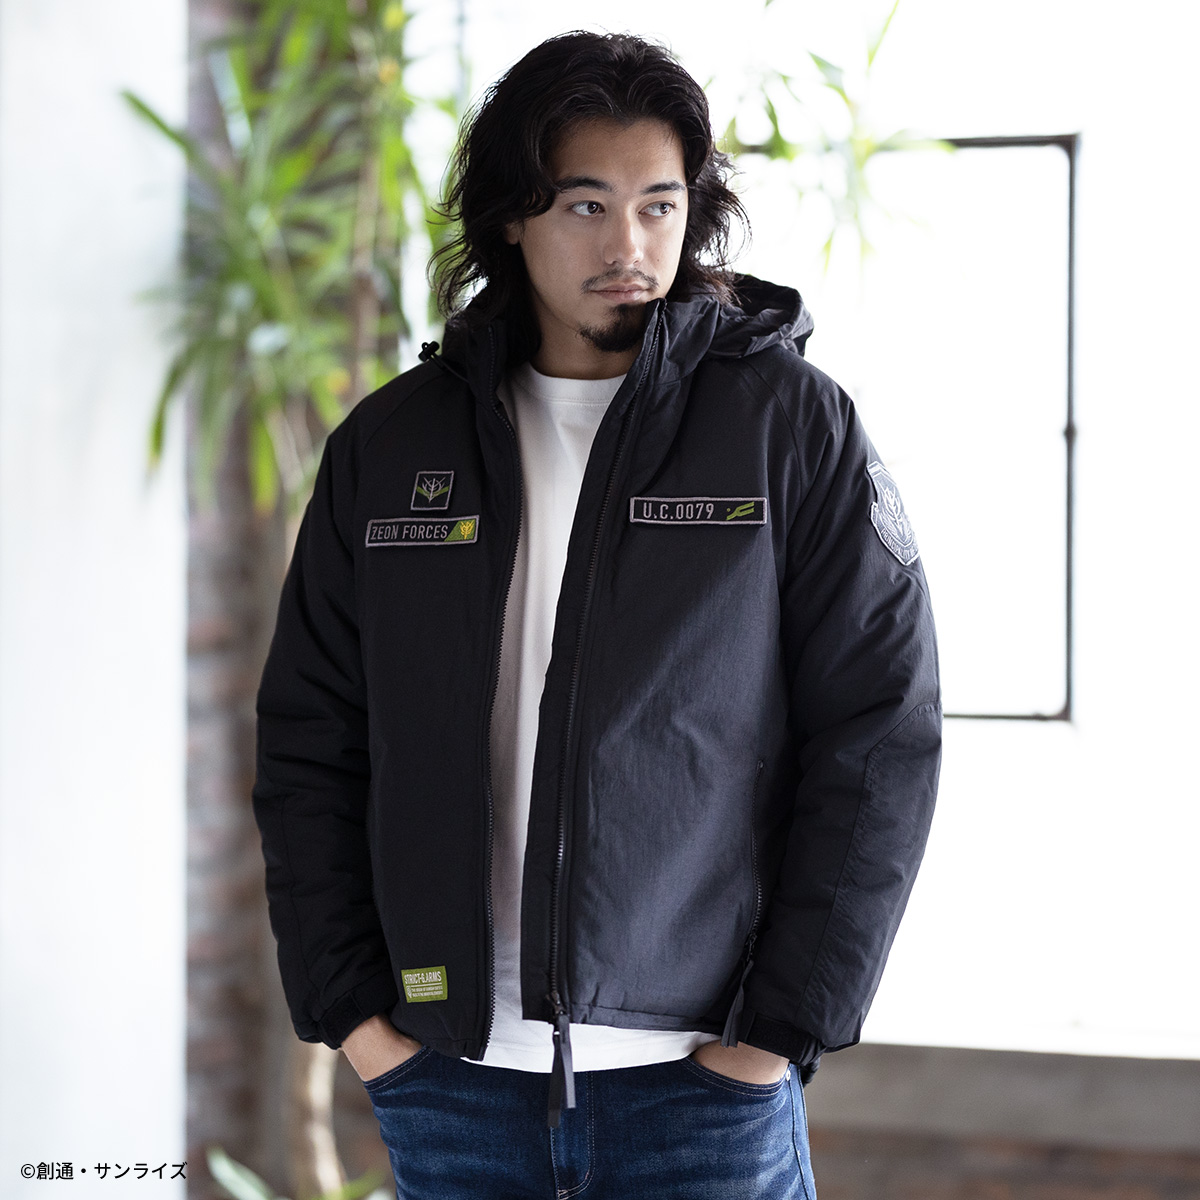 STRICT-G.ARMS『機動戦士ガンダム』LEVEL7 JACKET ZEON FORCESモデル